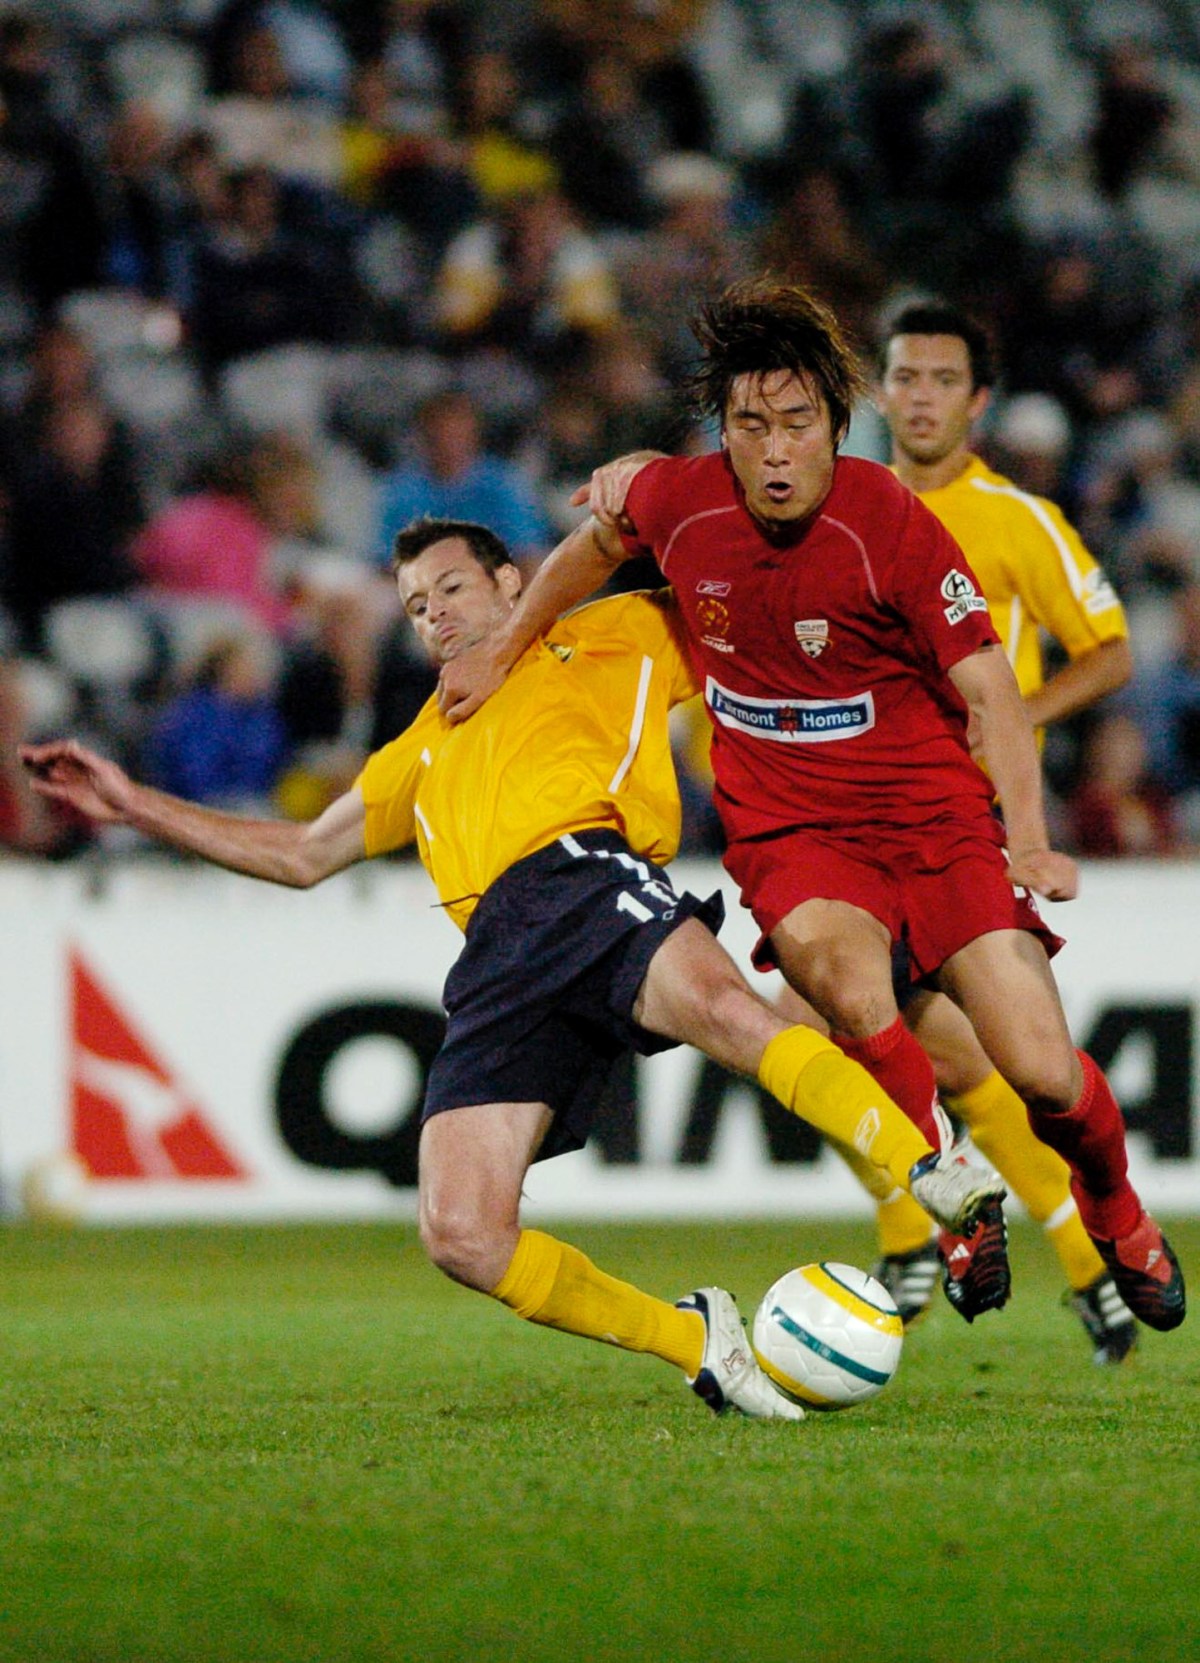 Gosford, May 11, 2005. Damien Brown of the Central Coast Mariners is tackled by Shengqing Qu of Adelaide United during the FIFA Club World Championship Australian Qualifying Tournament at the Central Coast Stadium in Gosford. (AAP Image/Dean Lewins) NO ARCHIVING